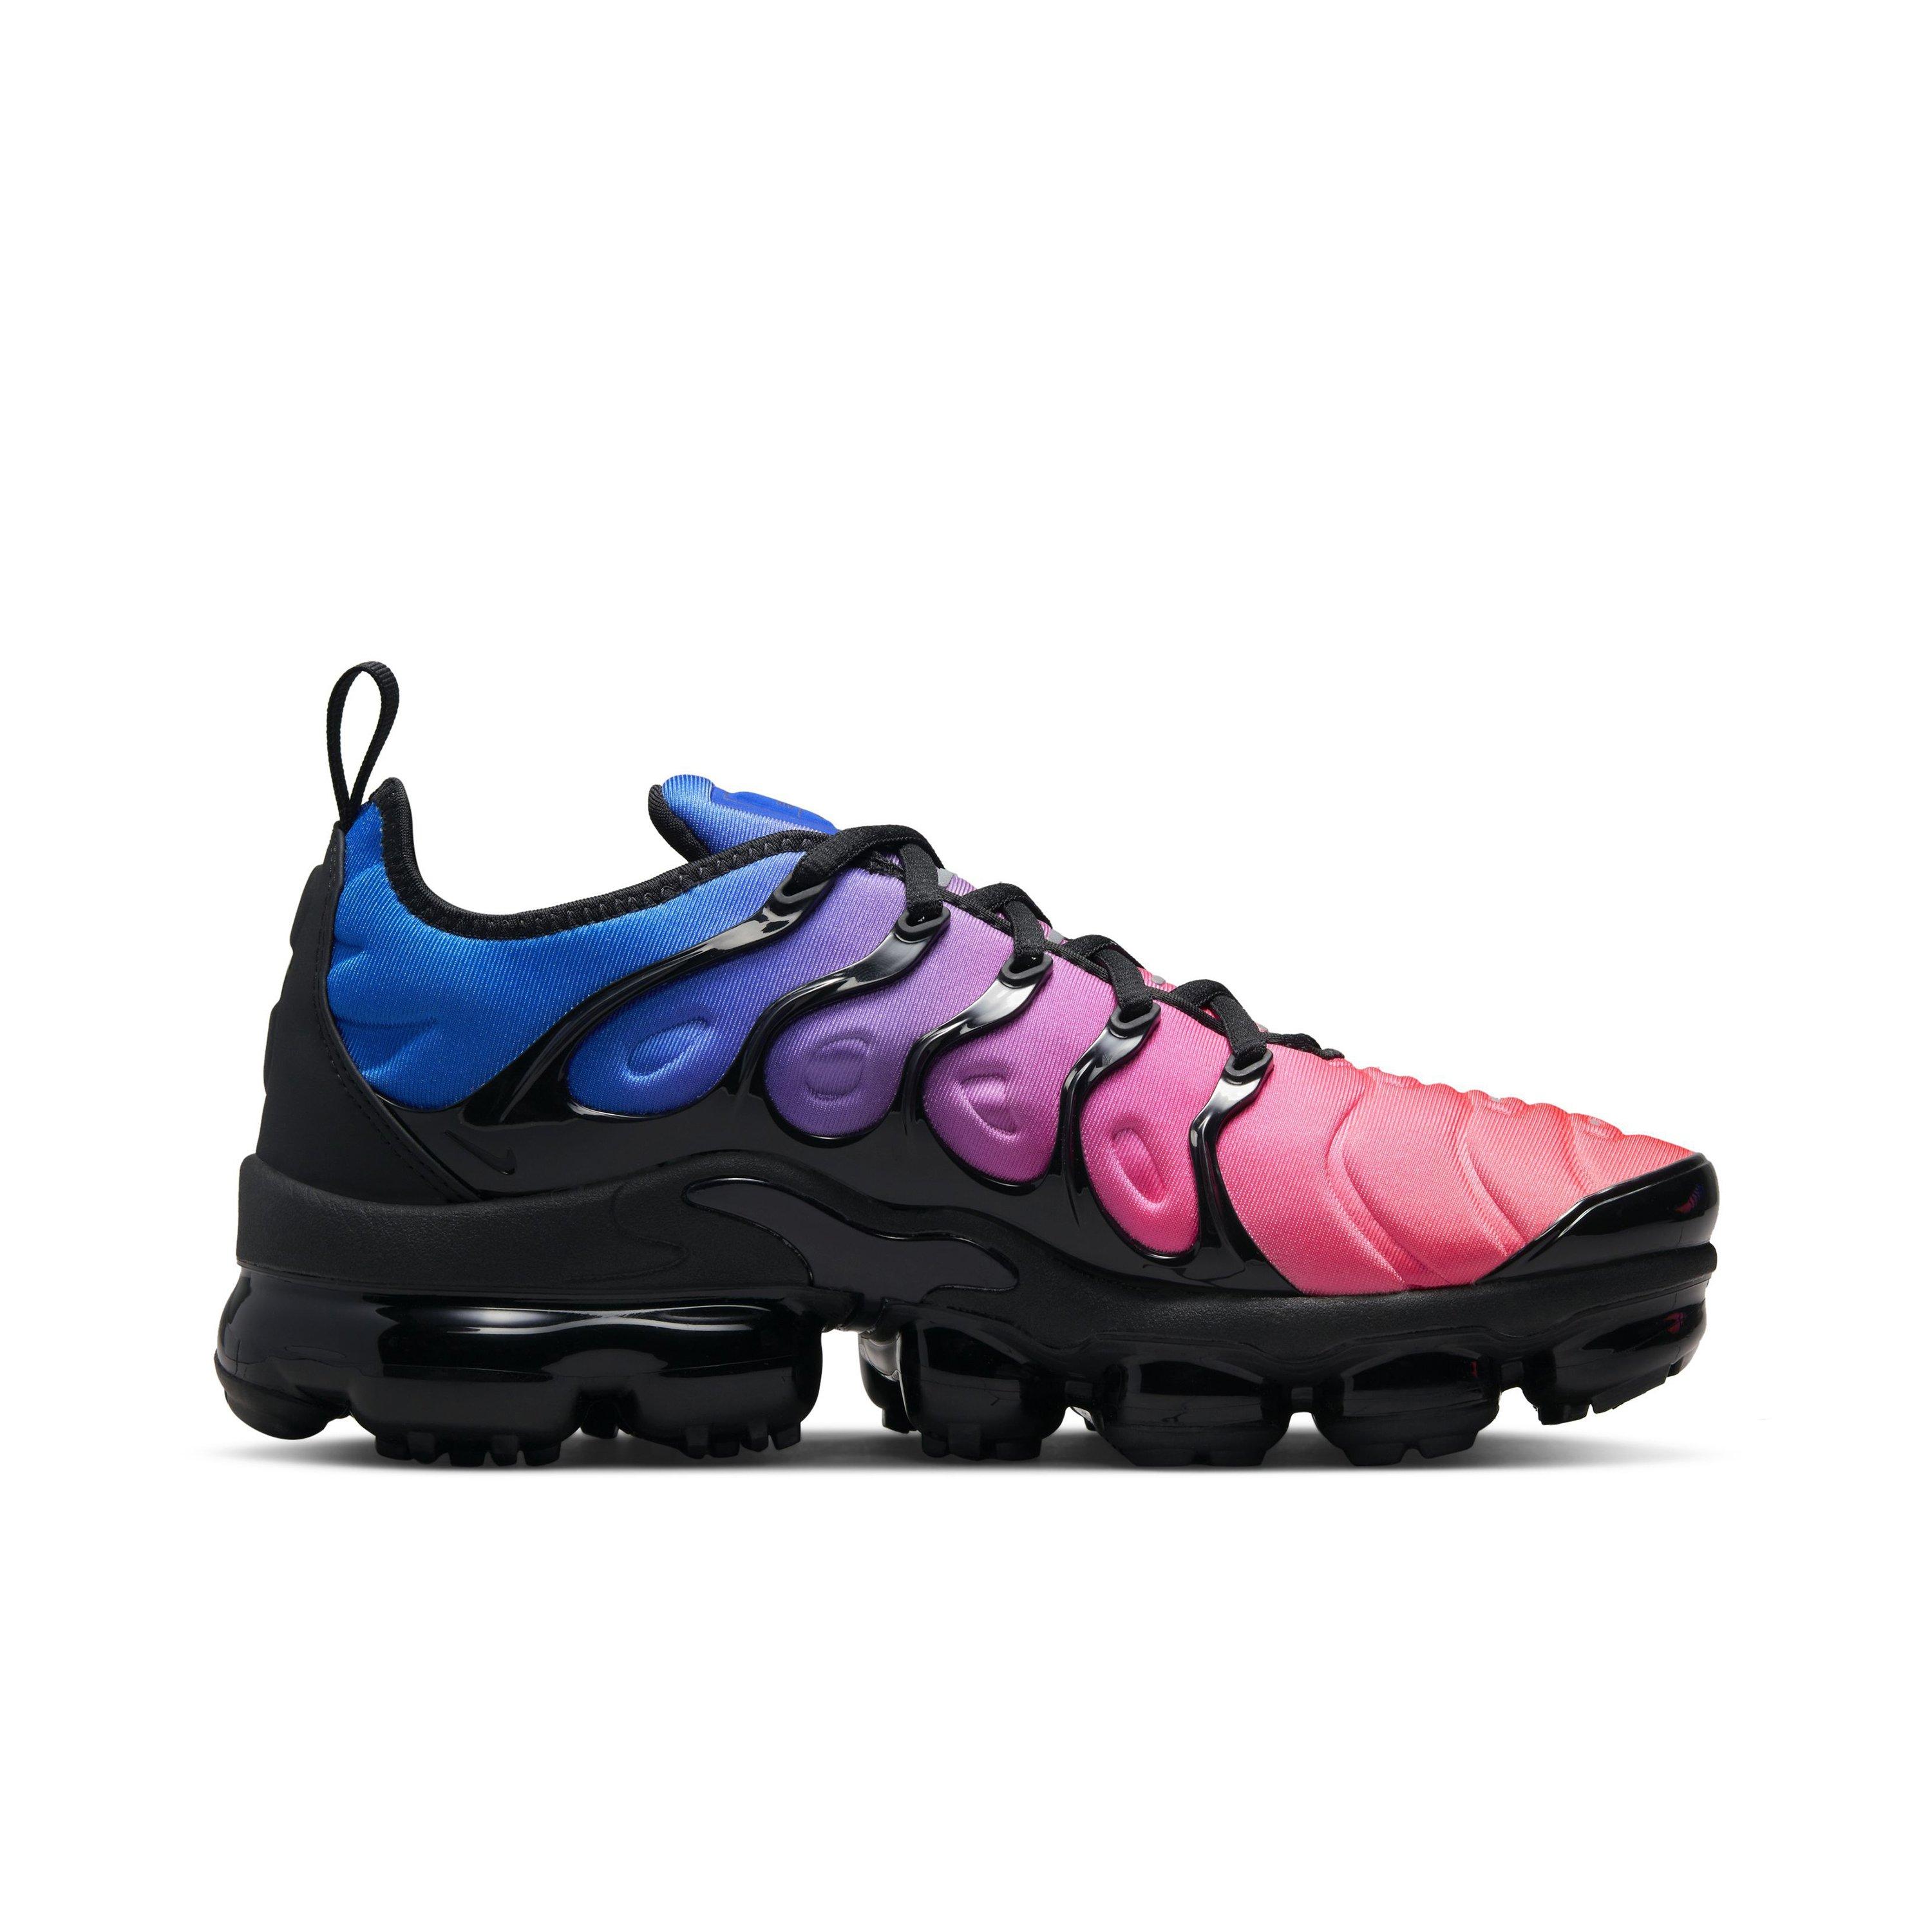 vapormax black and red womens